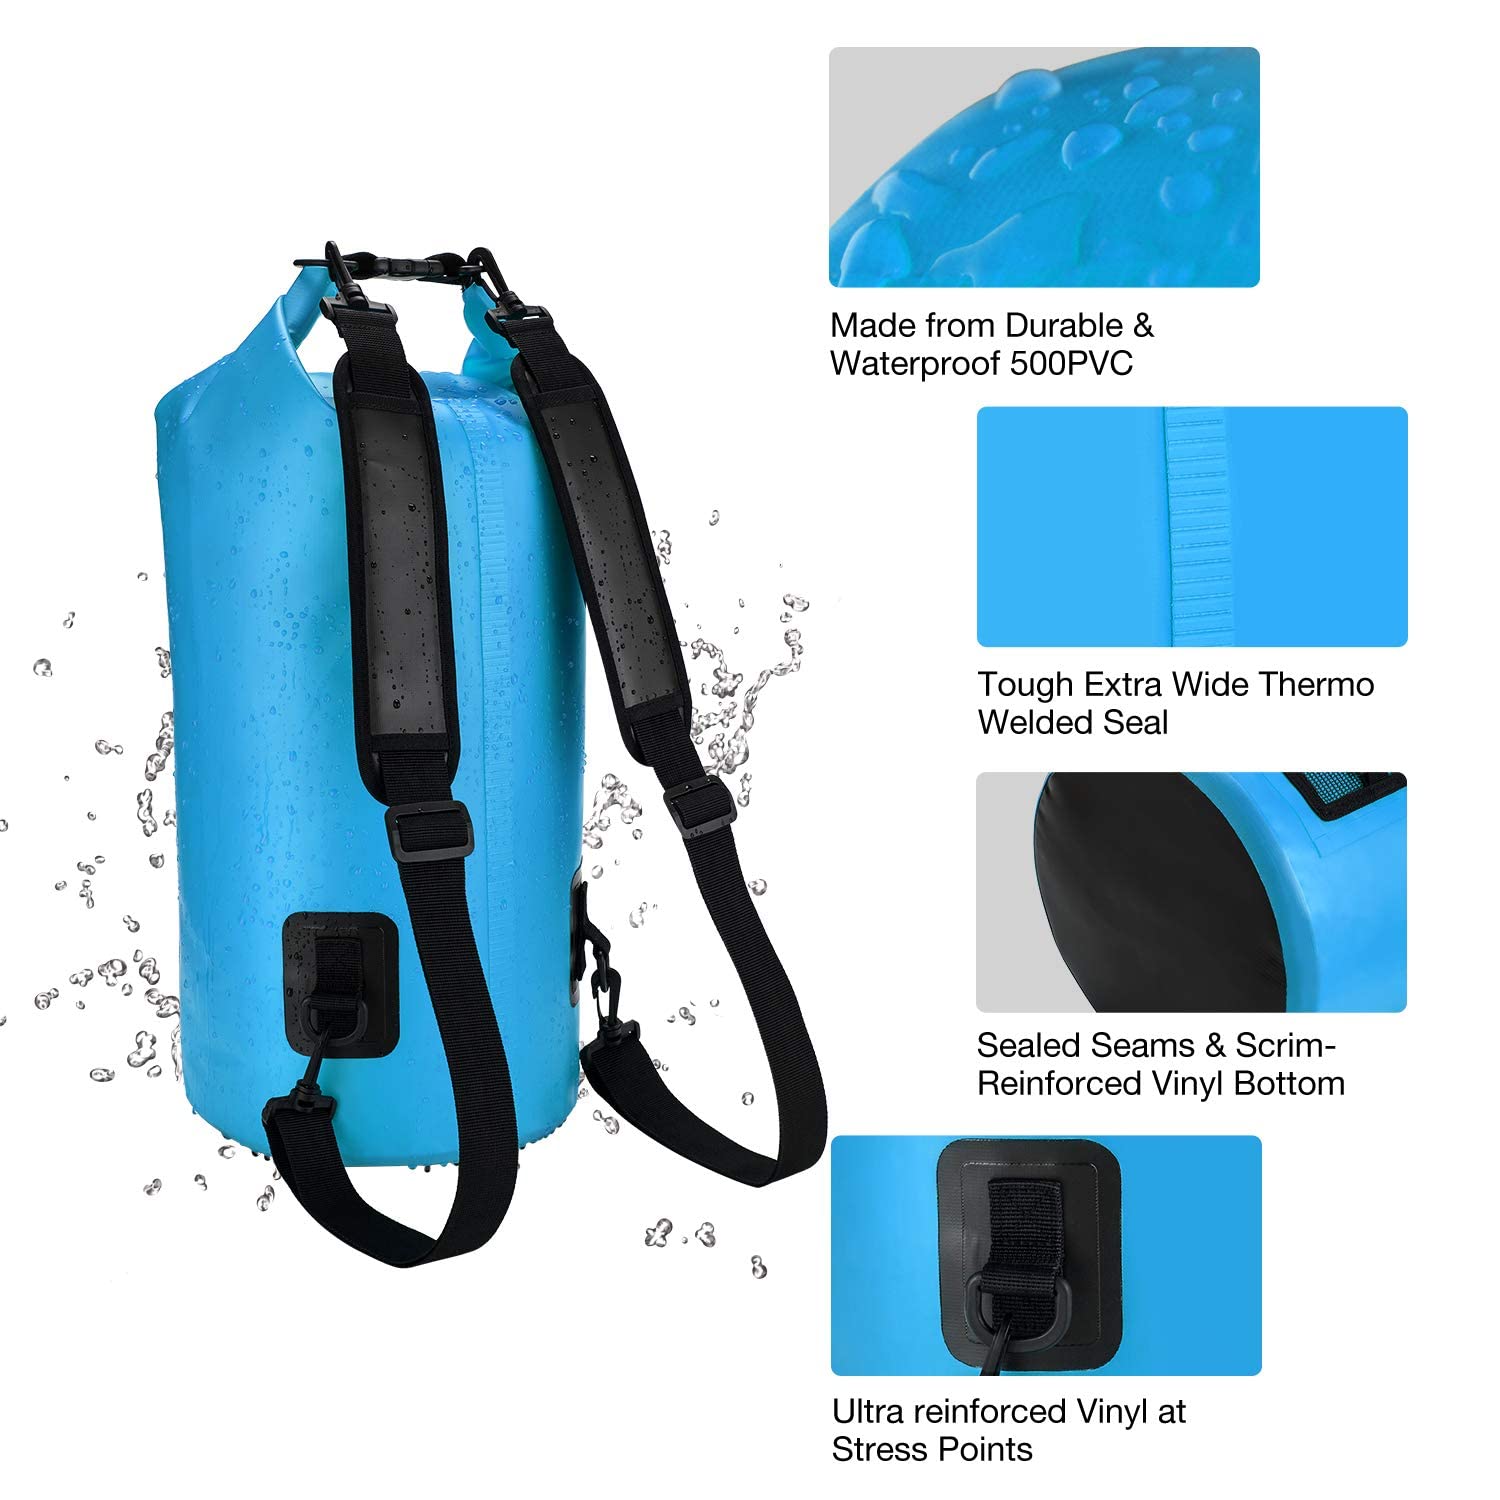 Piscifun Dry Bag, Waterproof Floating Backpack 5L/10L/20L/30L/40L, with Waterproof Phone Case for Kayking, Boating, Kayaking, Surfing, Rafting and fishing